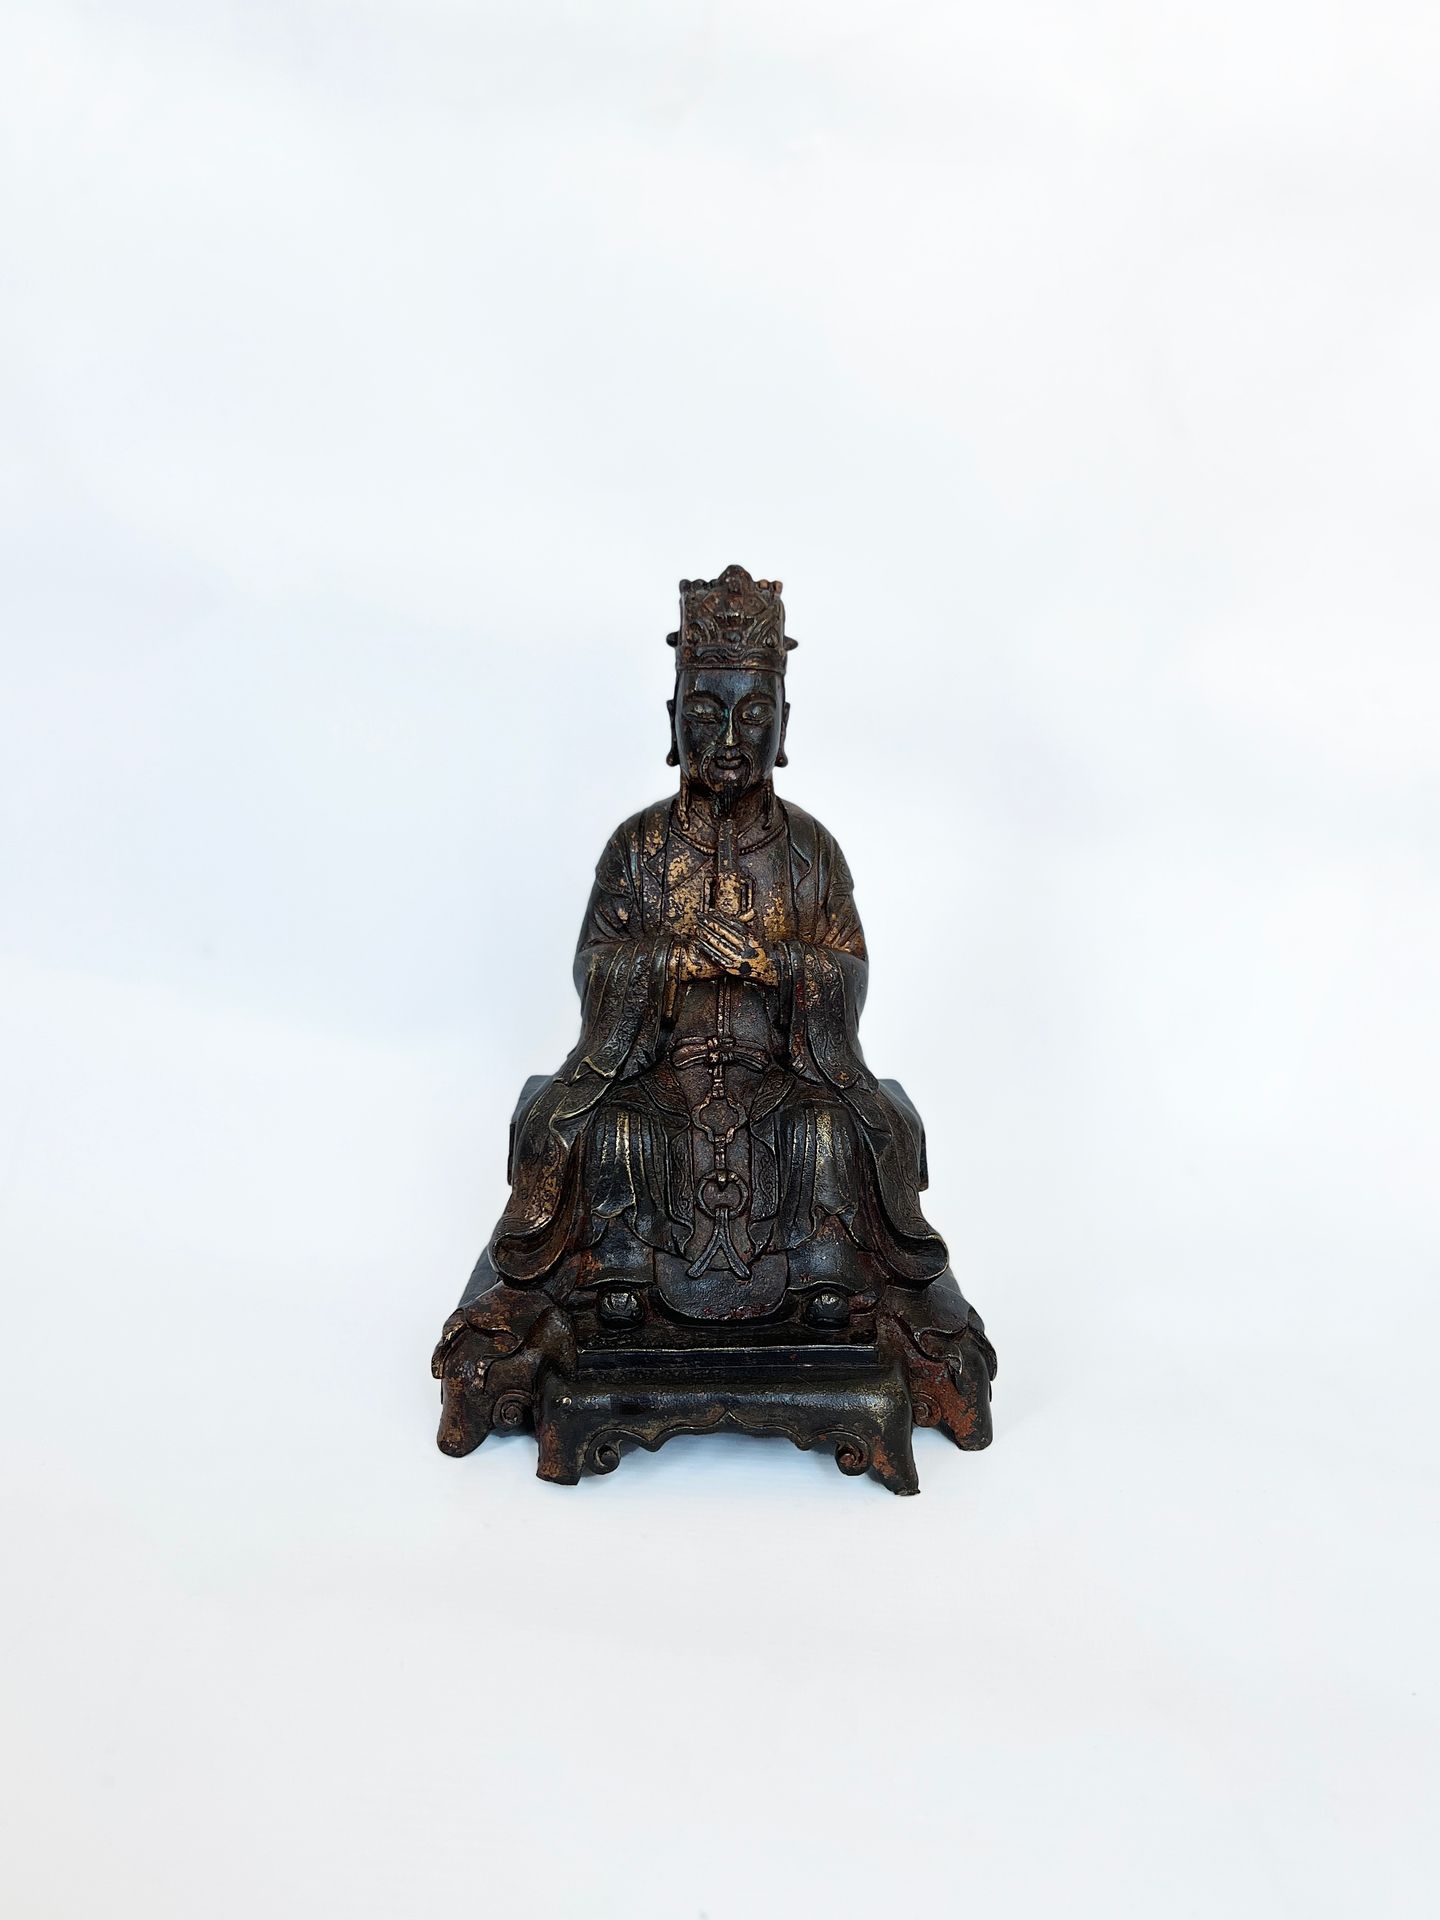 Null CHINA, late MING dynasty, 17th century

Cast iron statuette representing a &hellip;